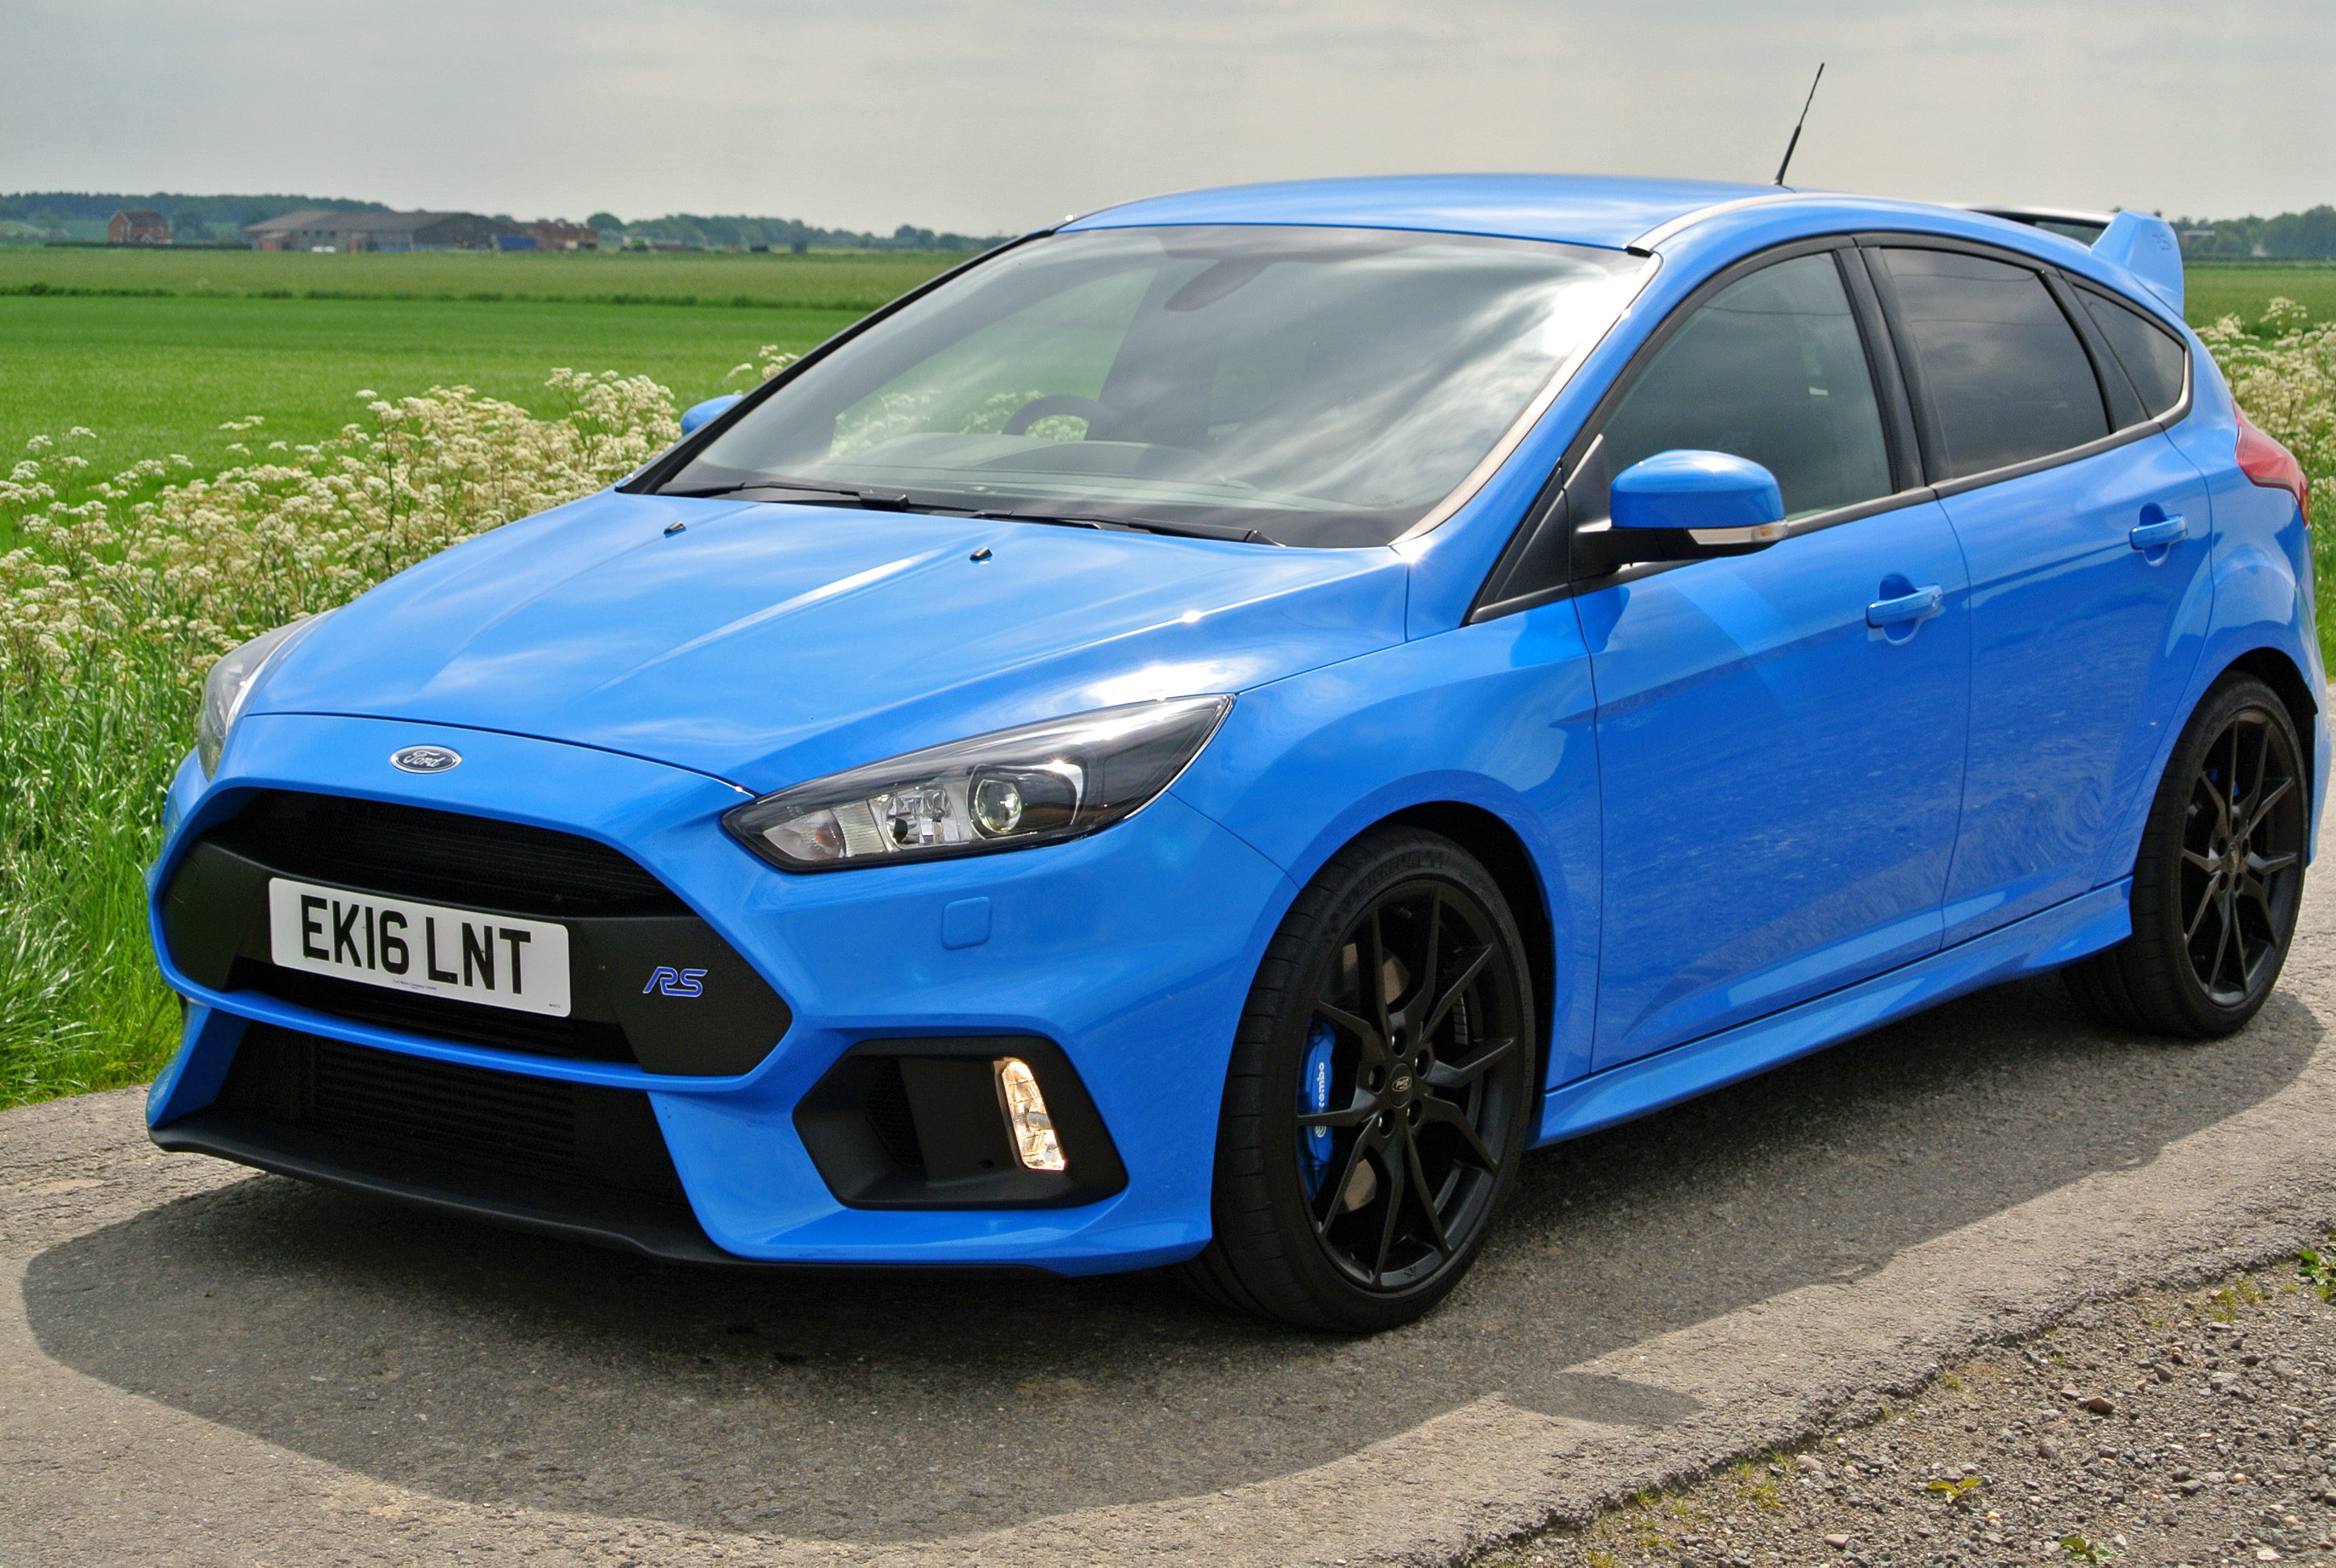 Monster motoring thrills are ten-a-penny with the latest Ford Focus RS